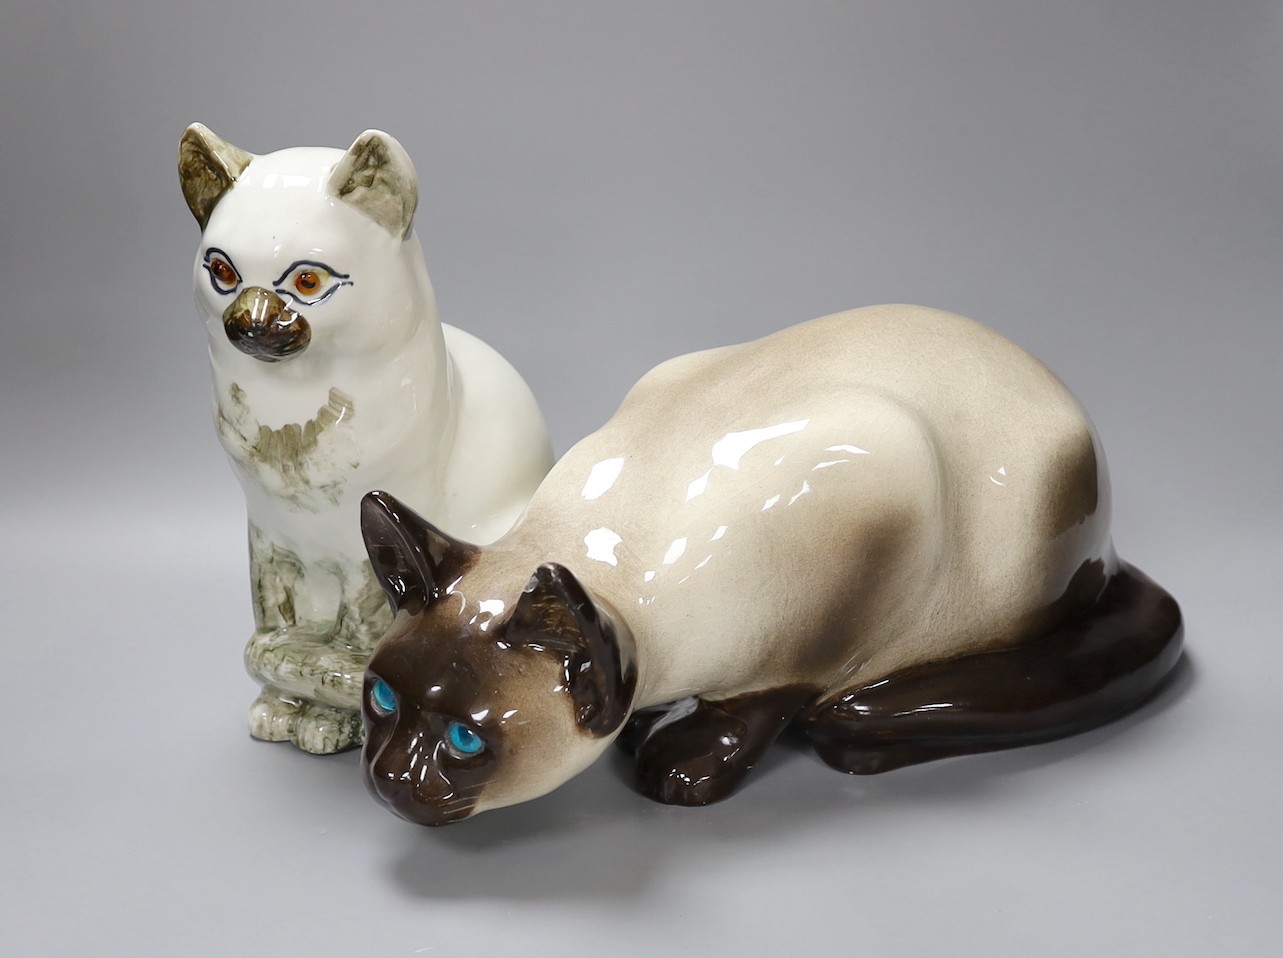 A Kensington ceramic lurking Siamese cat with blue glass eyes by Winstanley, together with another, tallest 26cm